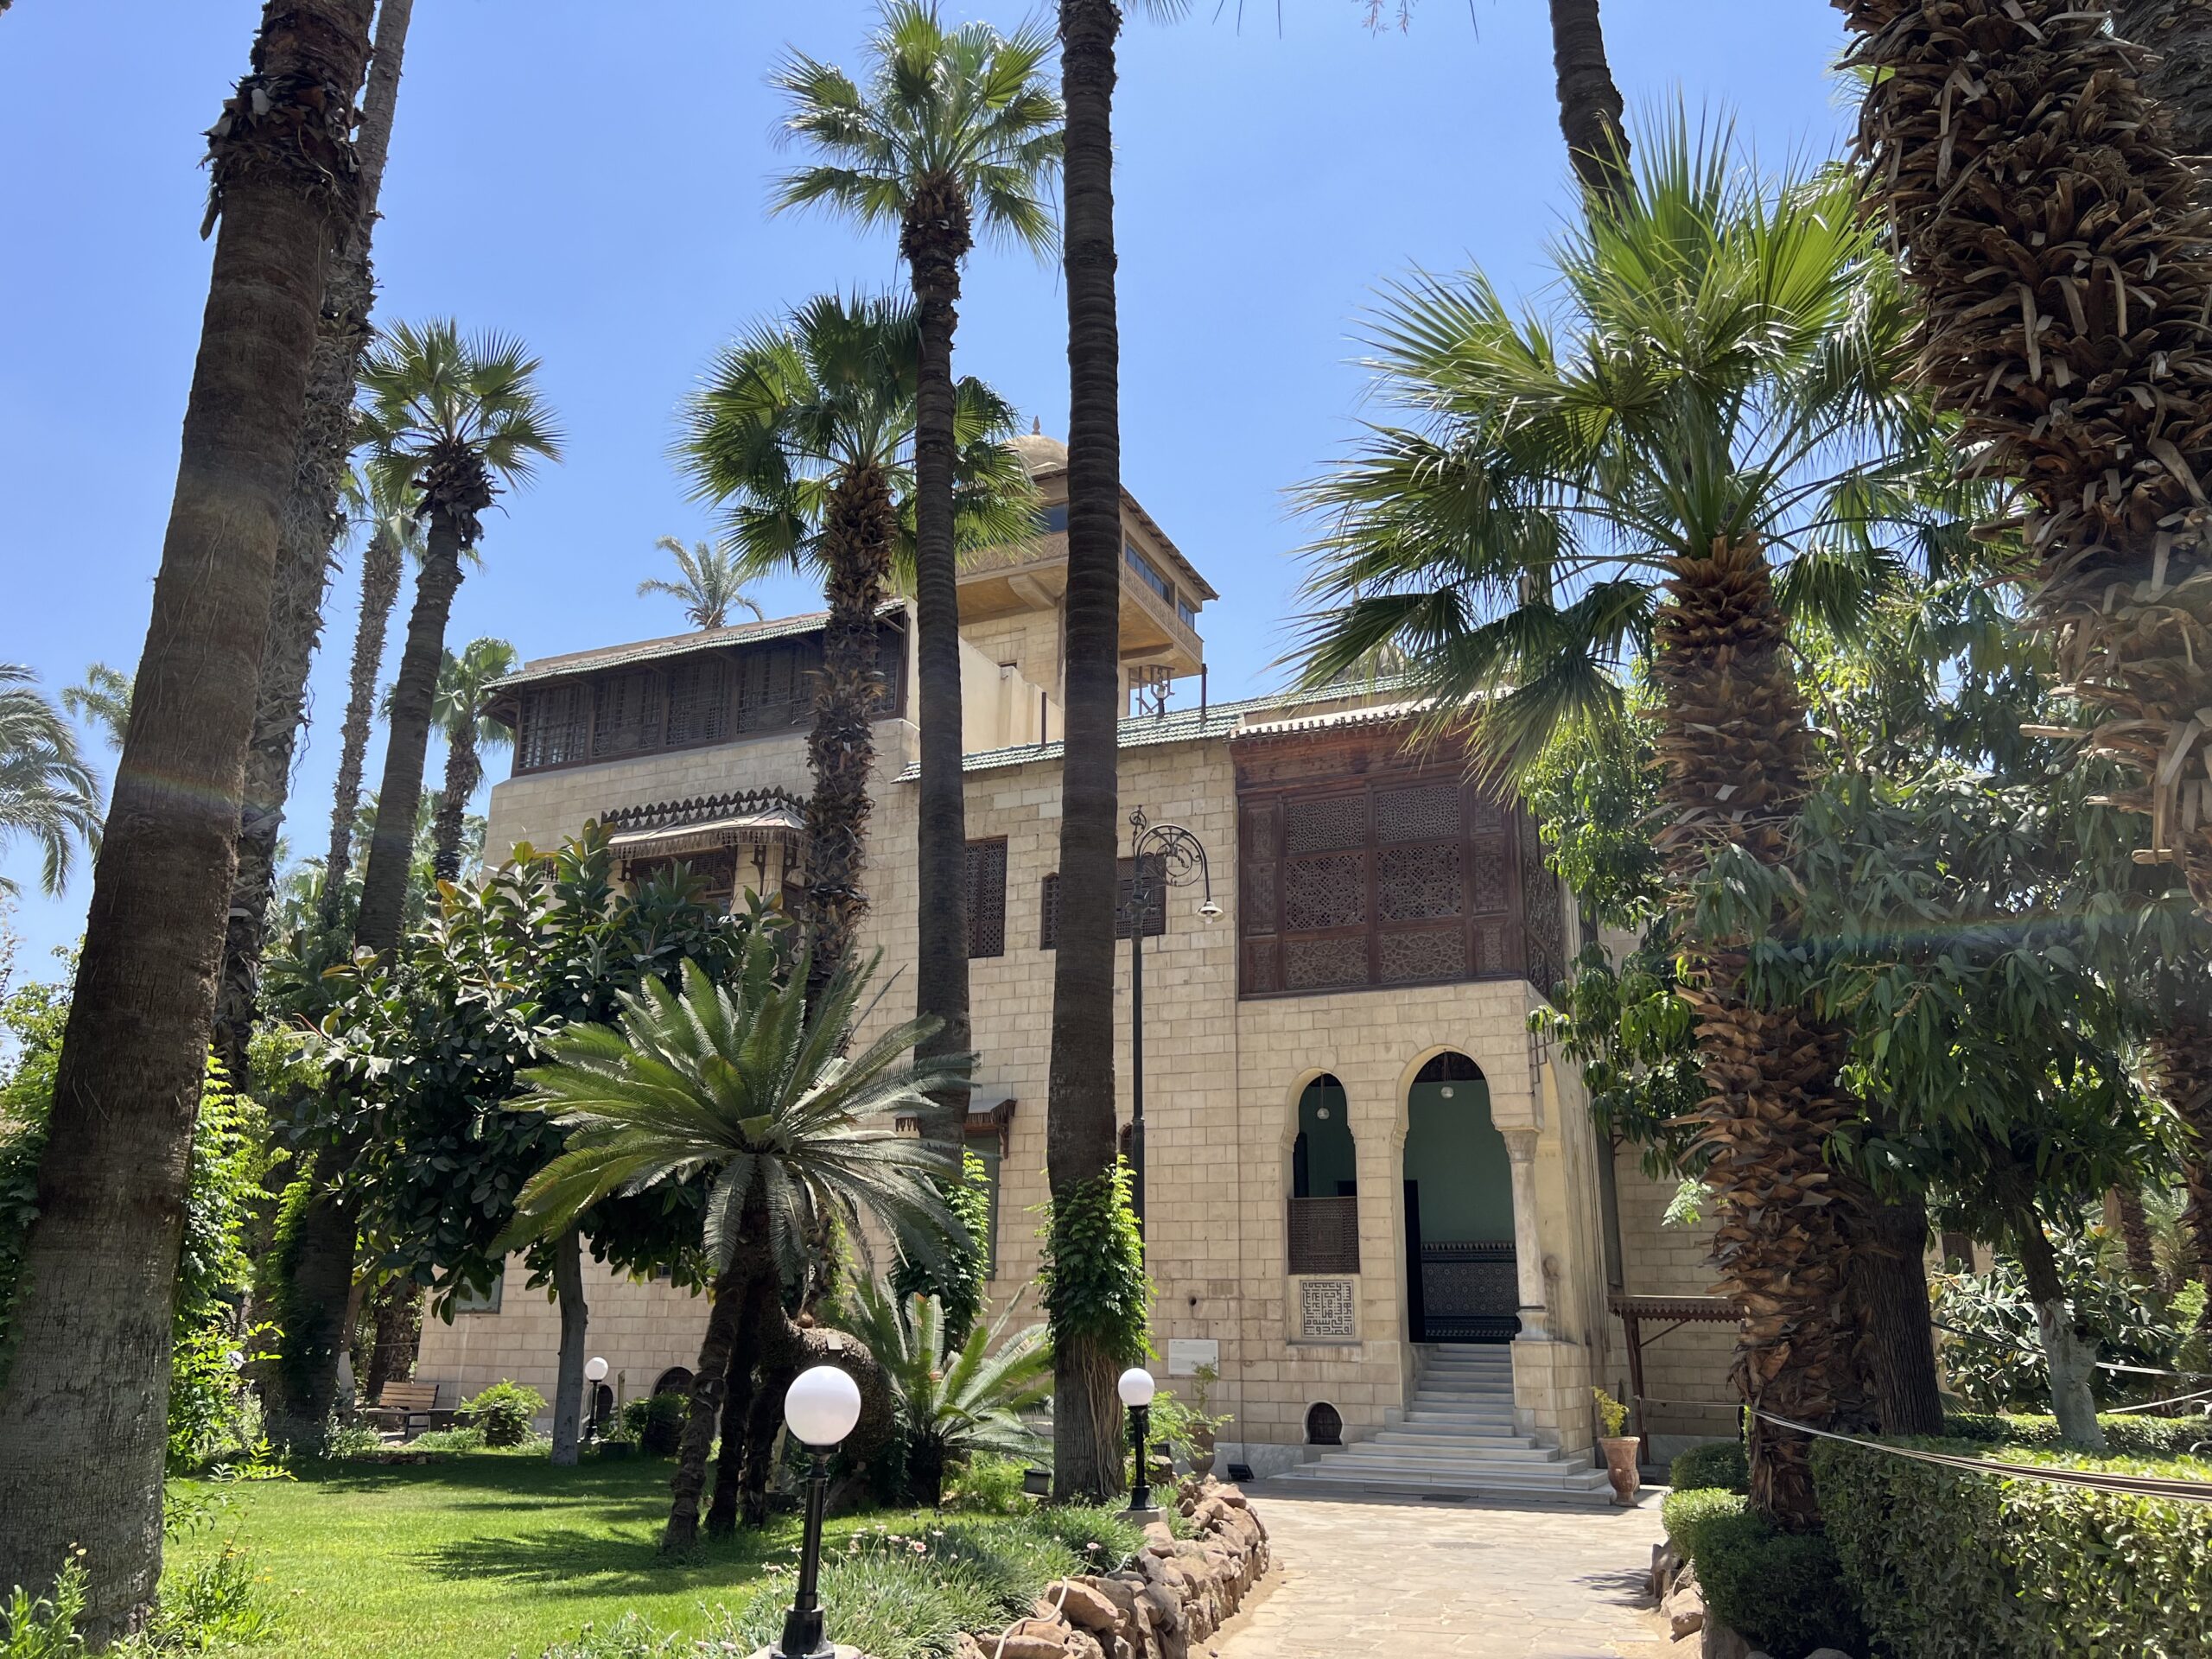 Prince Mohamed Ali Palace, Cairo, Egypt